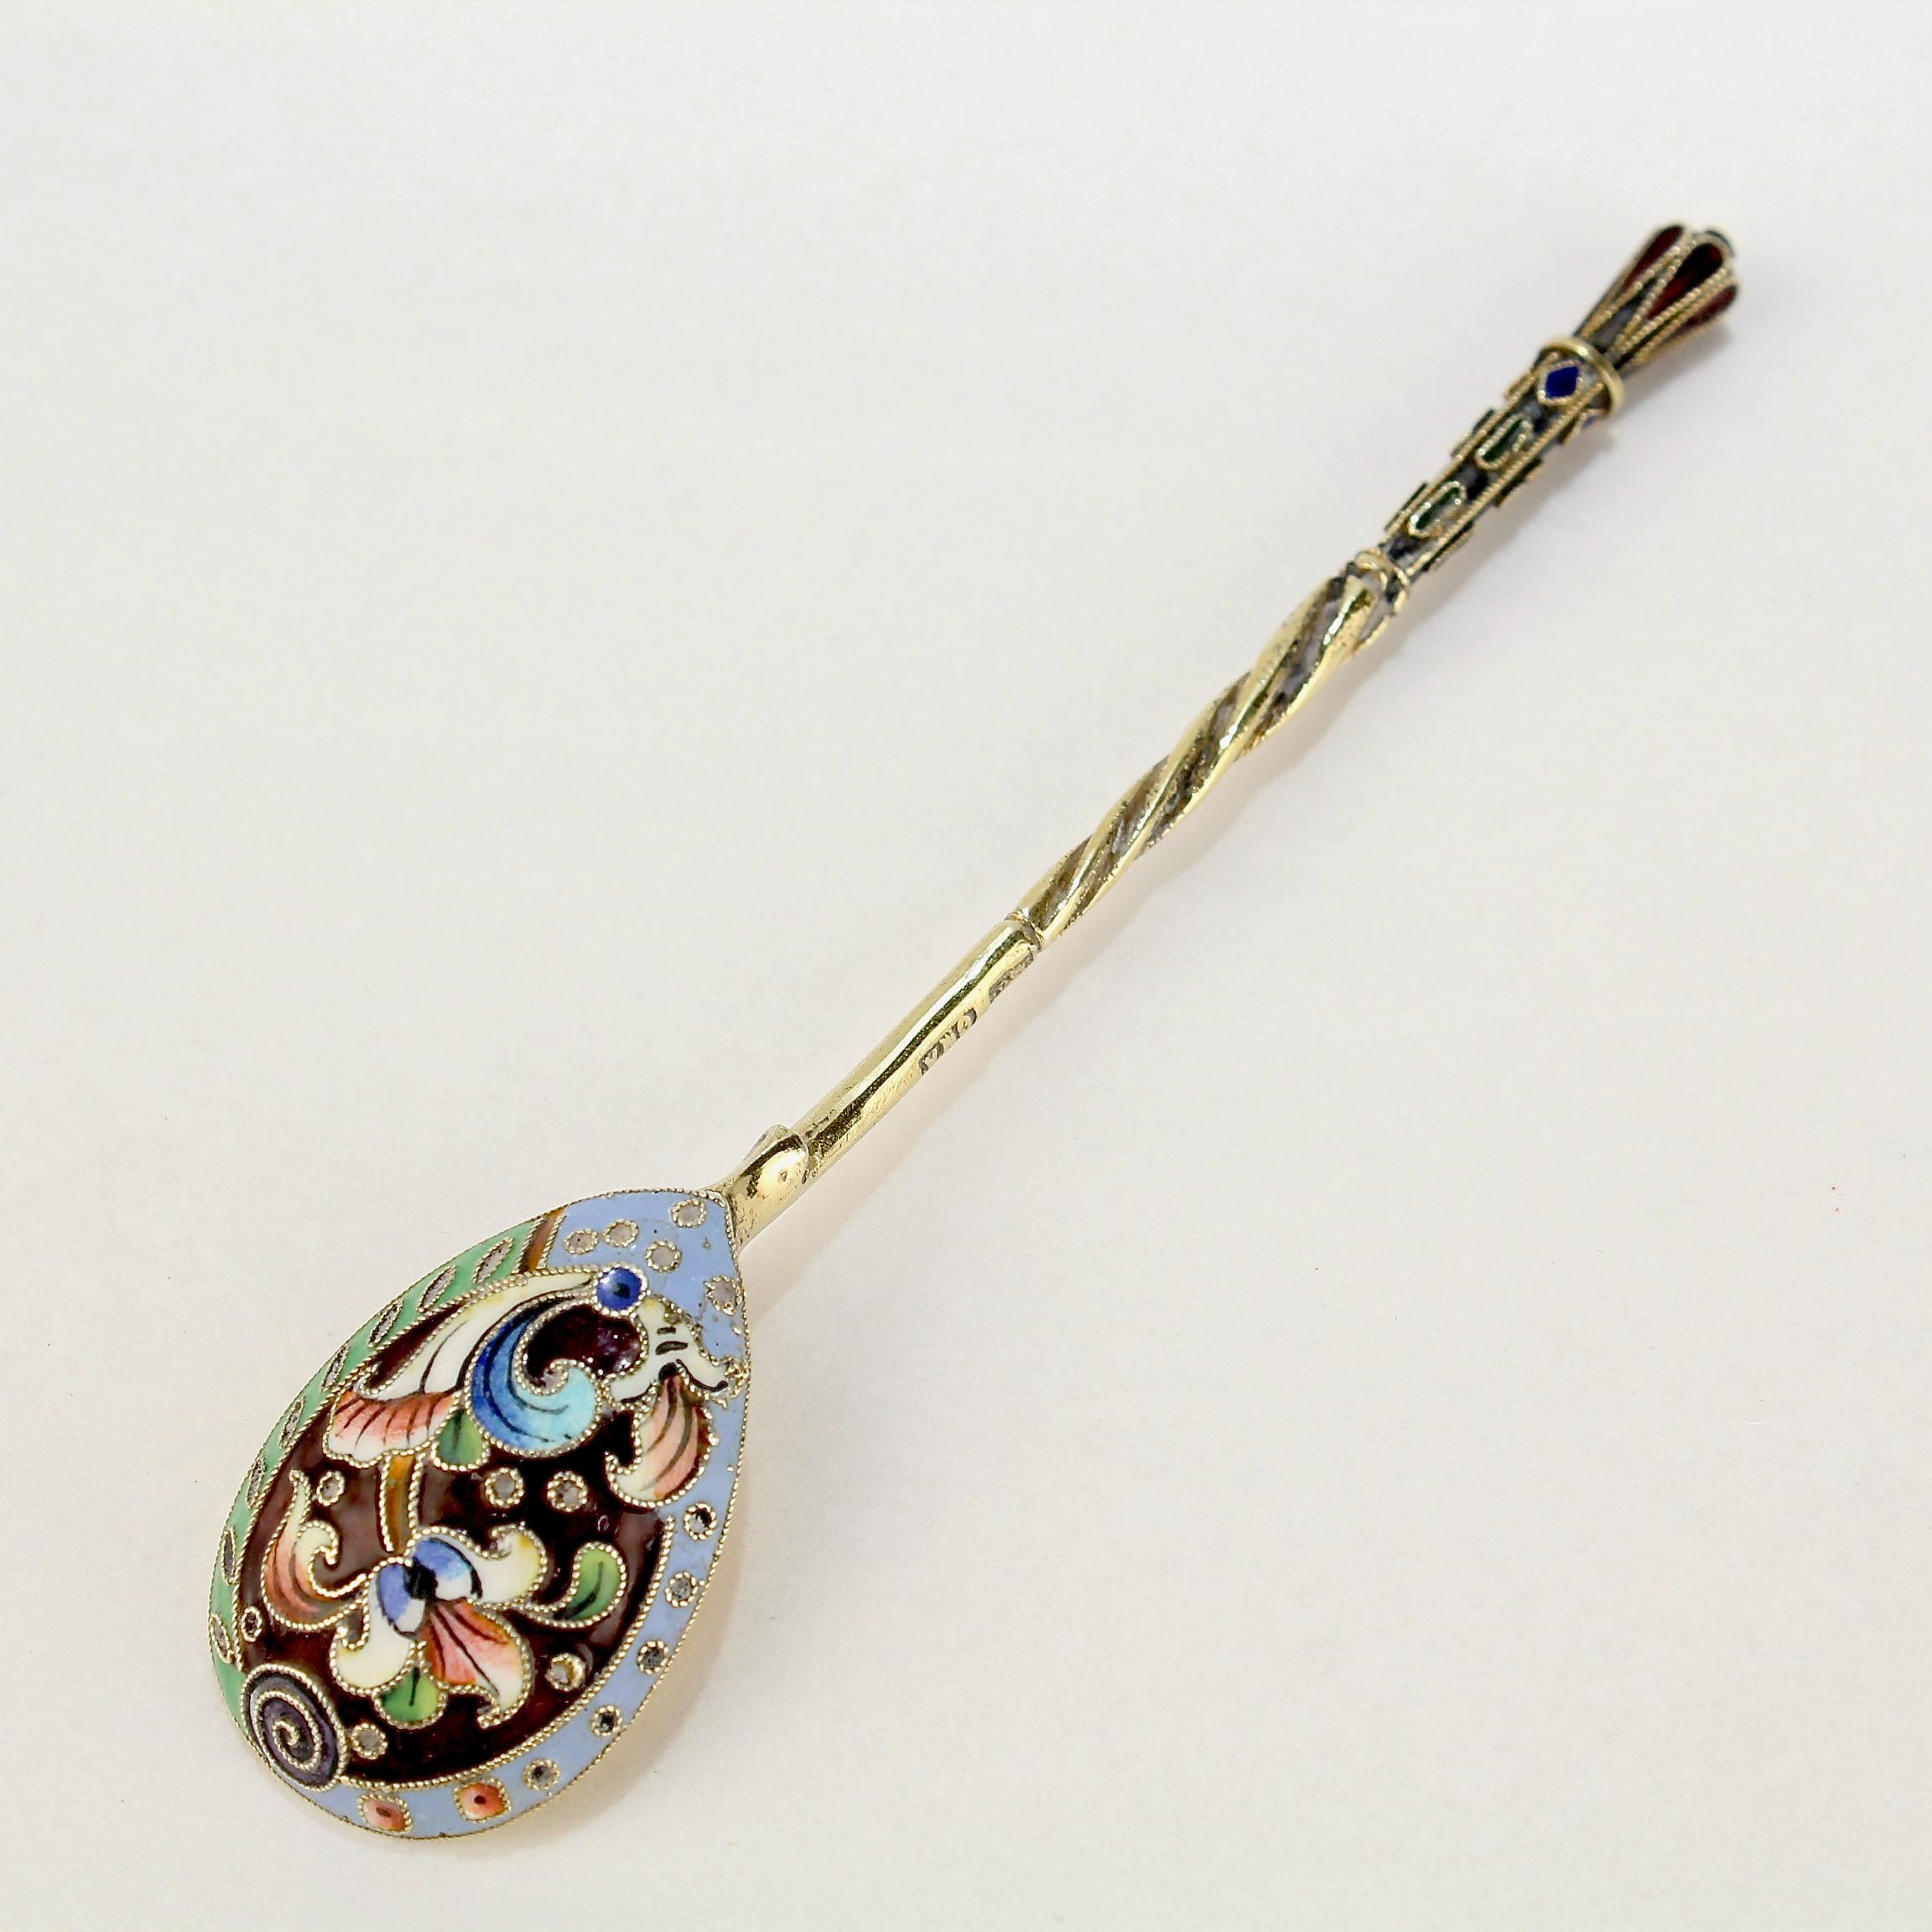 A very fine antique Russian tea or kvosh spoon.

Possibly by Vasily M. Ashmarin. (The maker's mark is partly obliterated).

With polychrome shaded cloisonné enamel decoration to both the front and reverse.

Simply a wonderful piece of Imperial